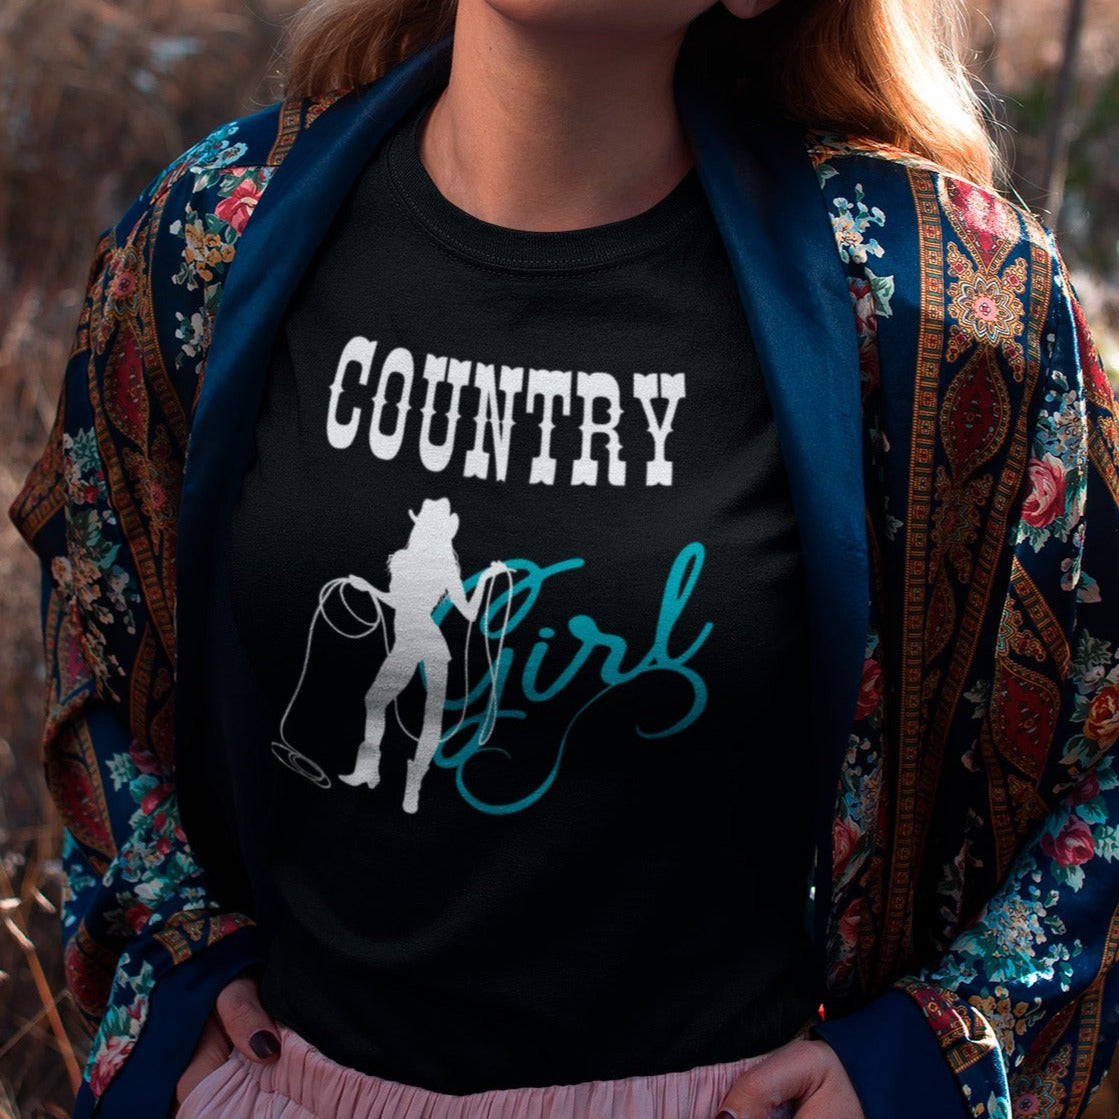 country-girl-with-lasso-black-t-shirt-cowgirl-pretty-girl-wearing-a-round-neck-t-shirt-mockup-while-outdoors